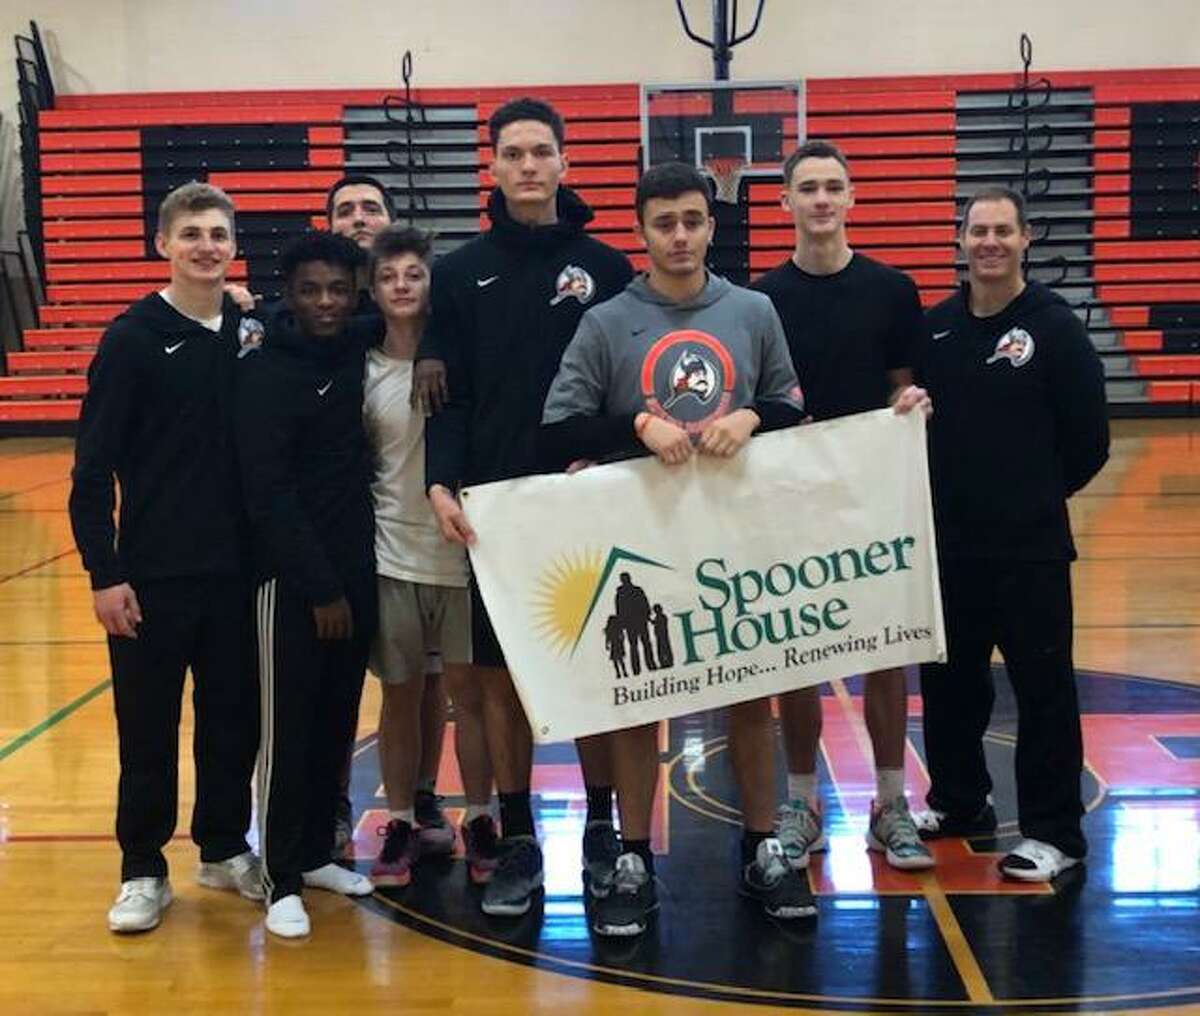 The Shelton High School Boys Basketball team in conjunction with Shelton Biddy Basketball held a free basketball clinic. Players were asked to donate non perishable items for Spooner House.